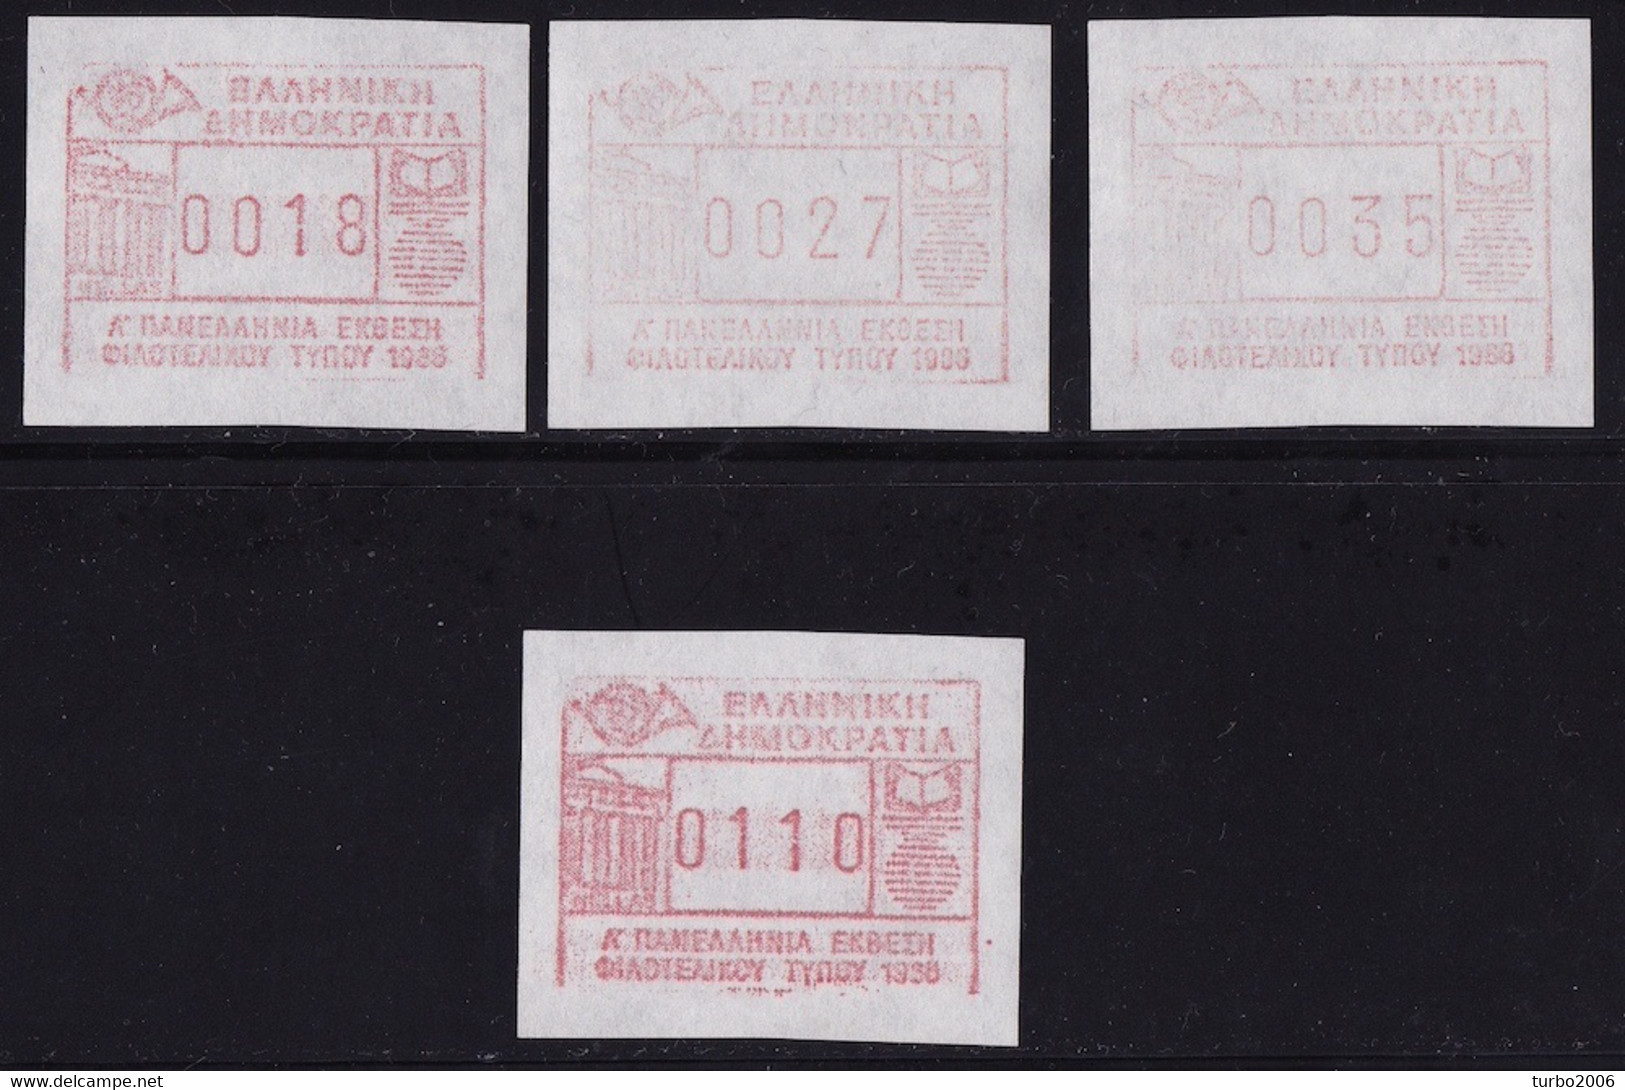 GREECE 1986 FRAMA Stamps For Panhelenic Literature Exhabition Set Of 18-27-35 DR + 110 Dr MNH Hellas M 12 - Automatenmarken [ATM]